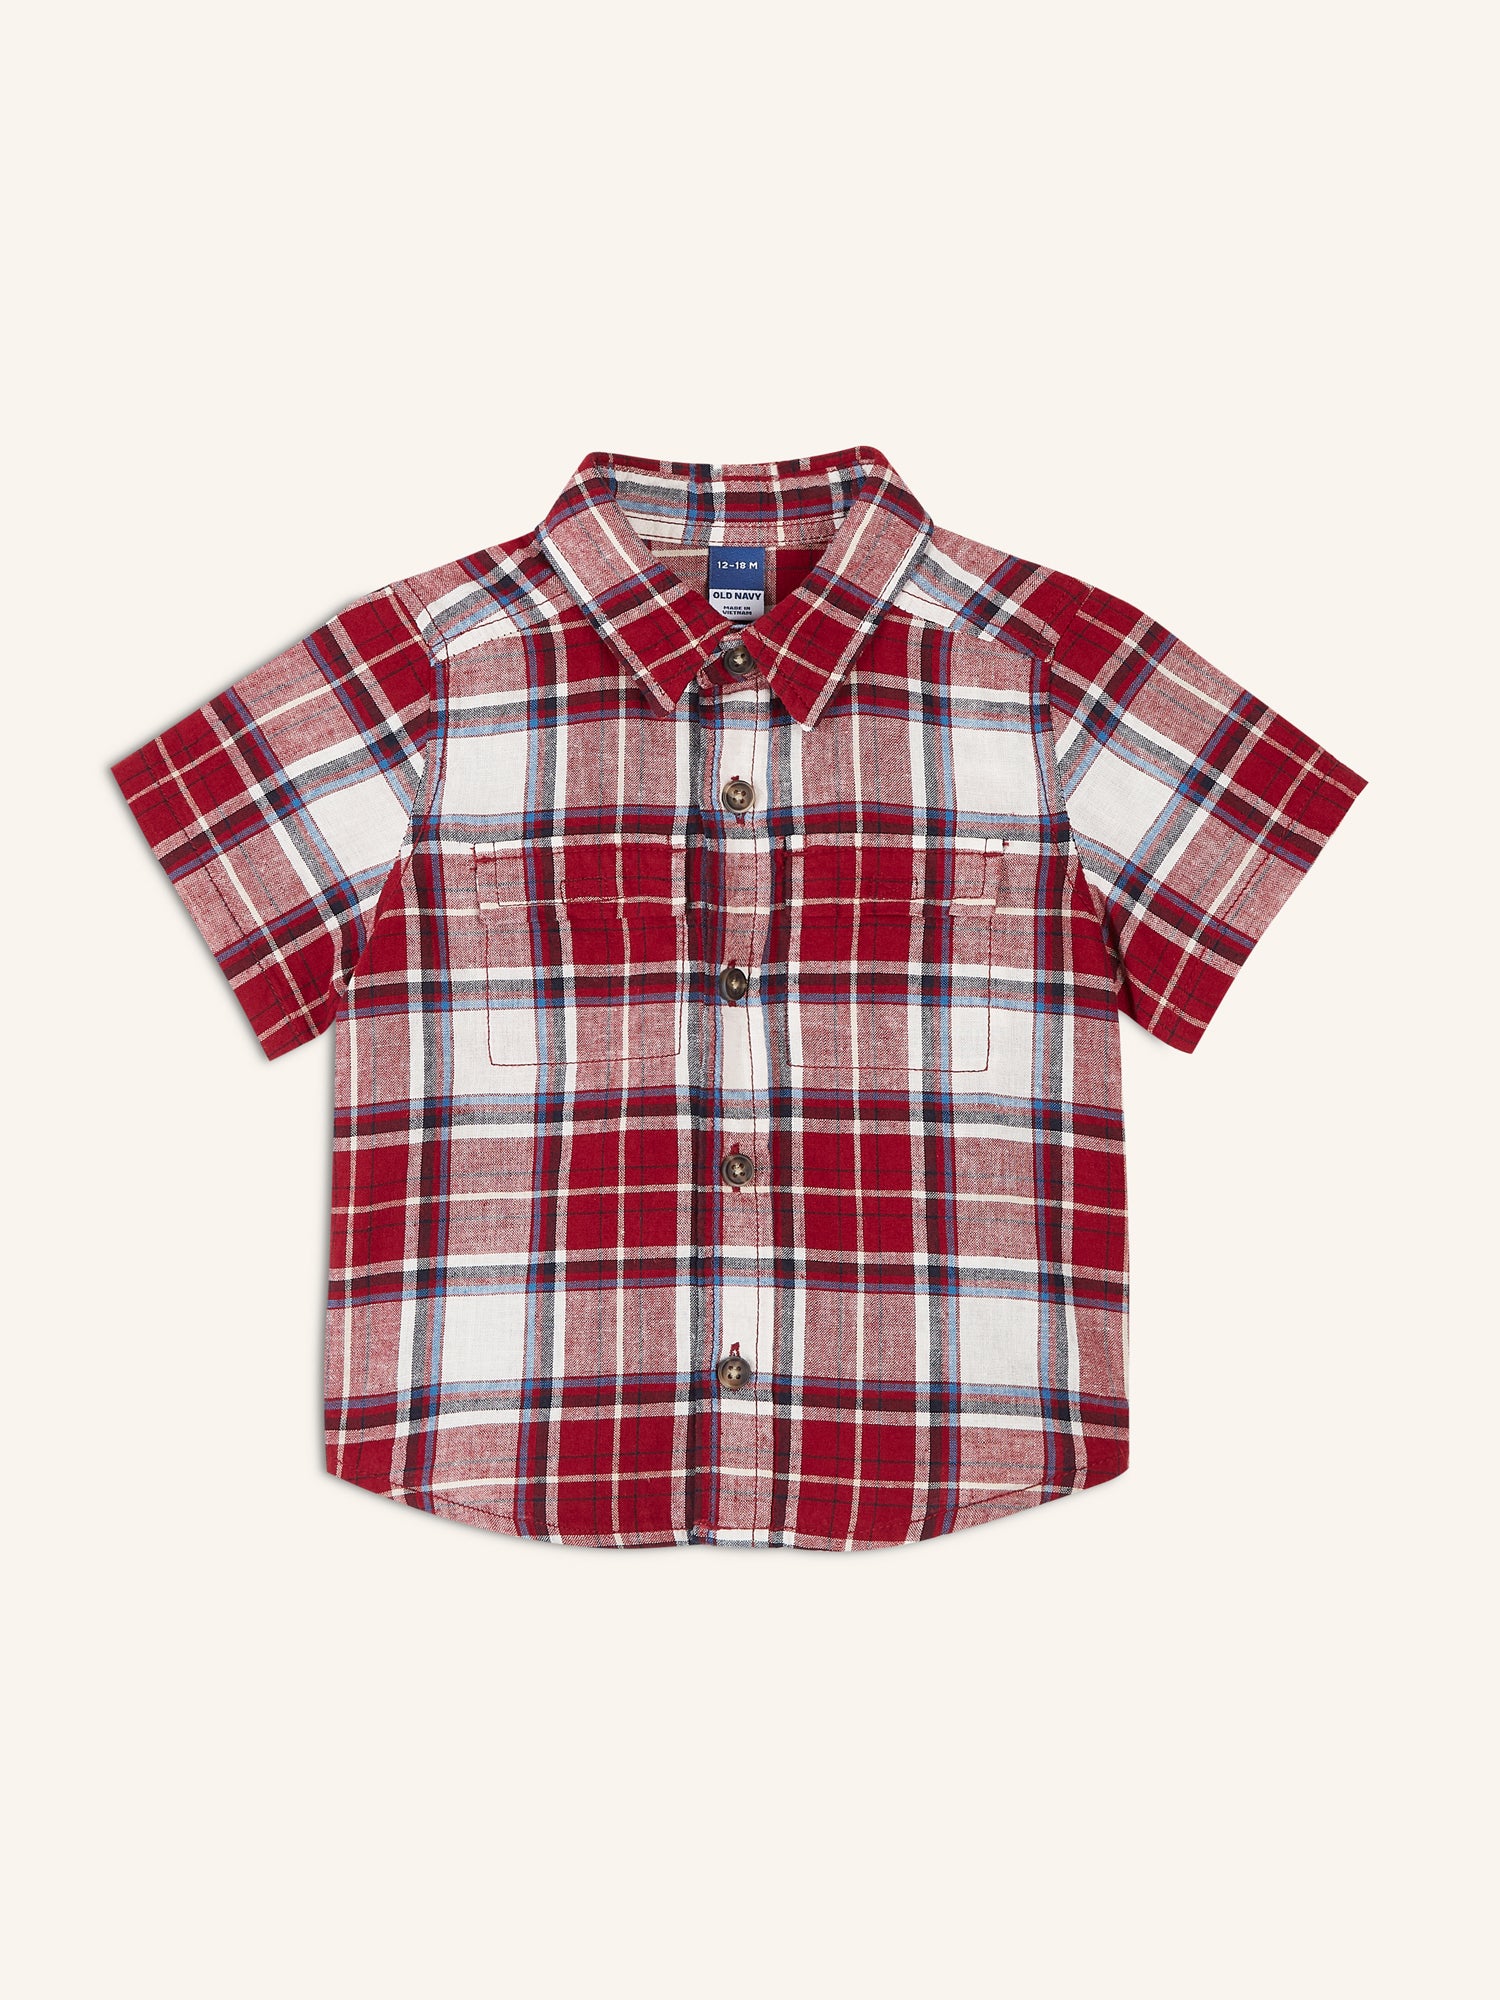 Toddler Boys Clearance Tagged Toddler - Old Navy Philippines